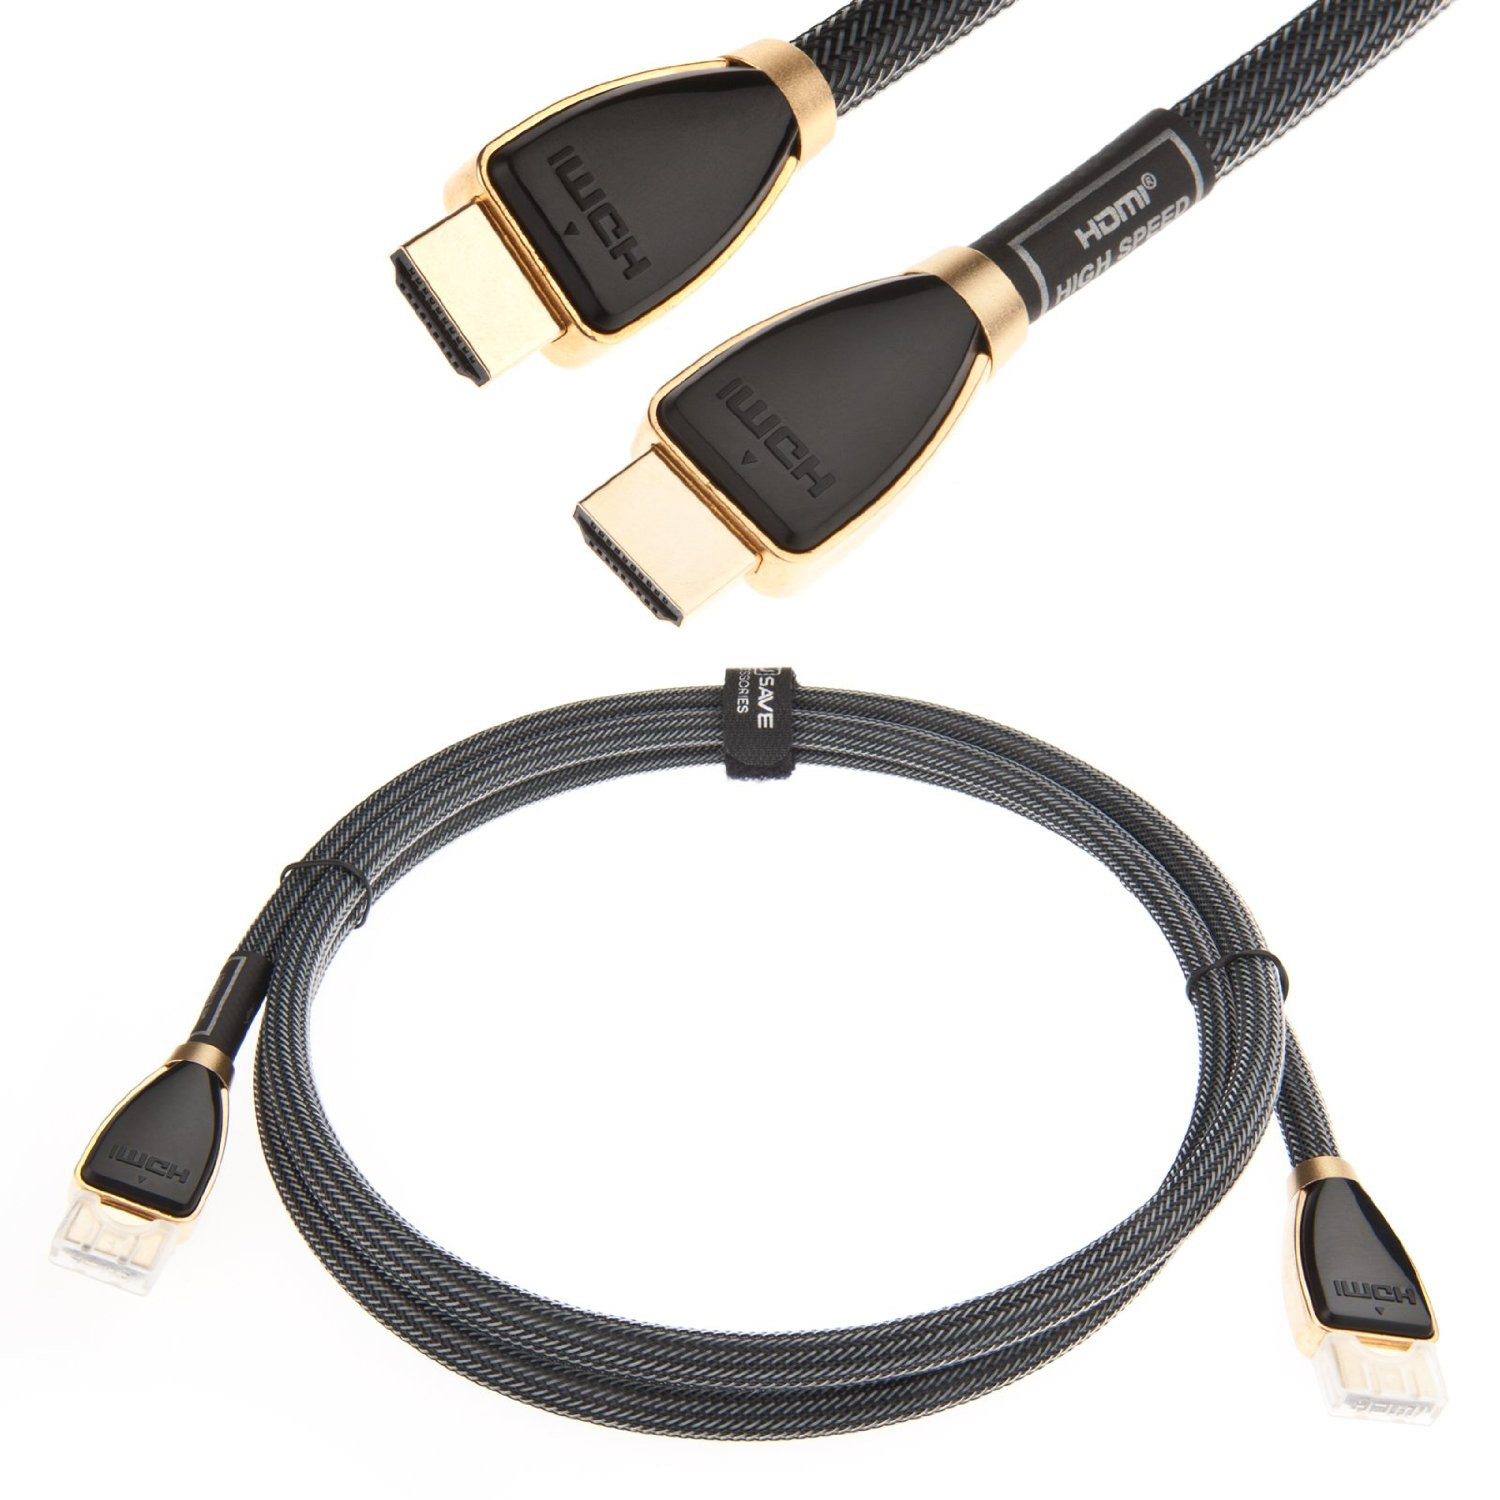 YouSave Accessories Accessories HDMI Cable 5m Gold Connectors